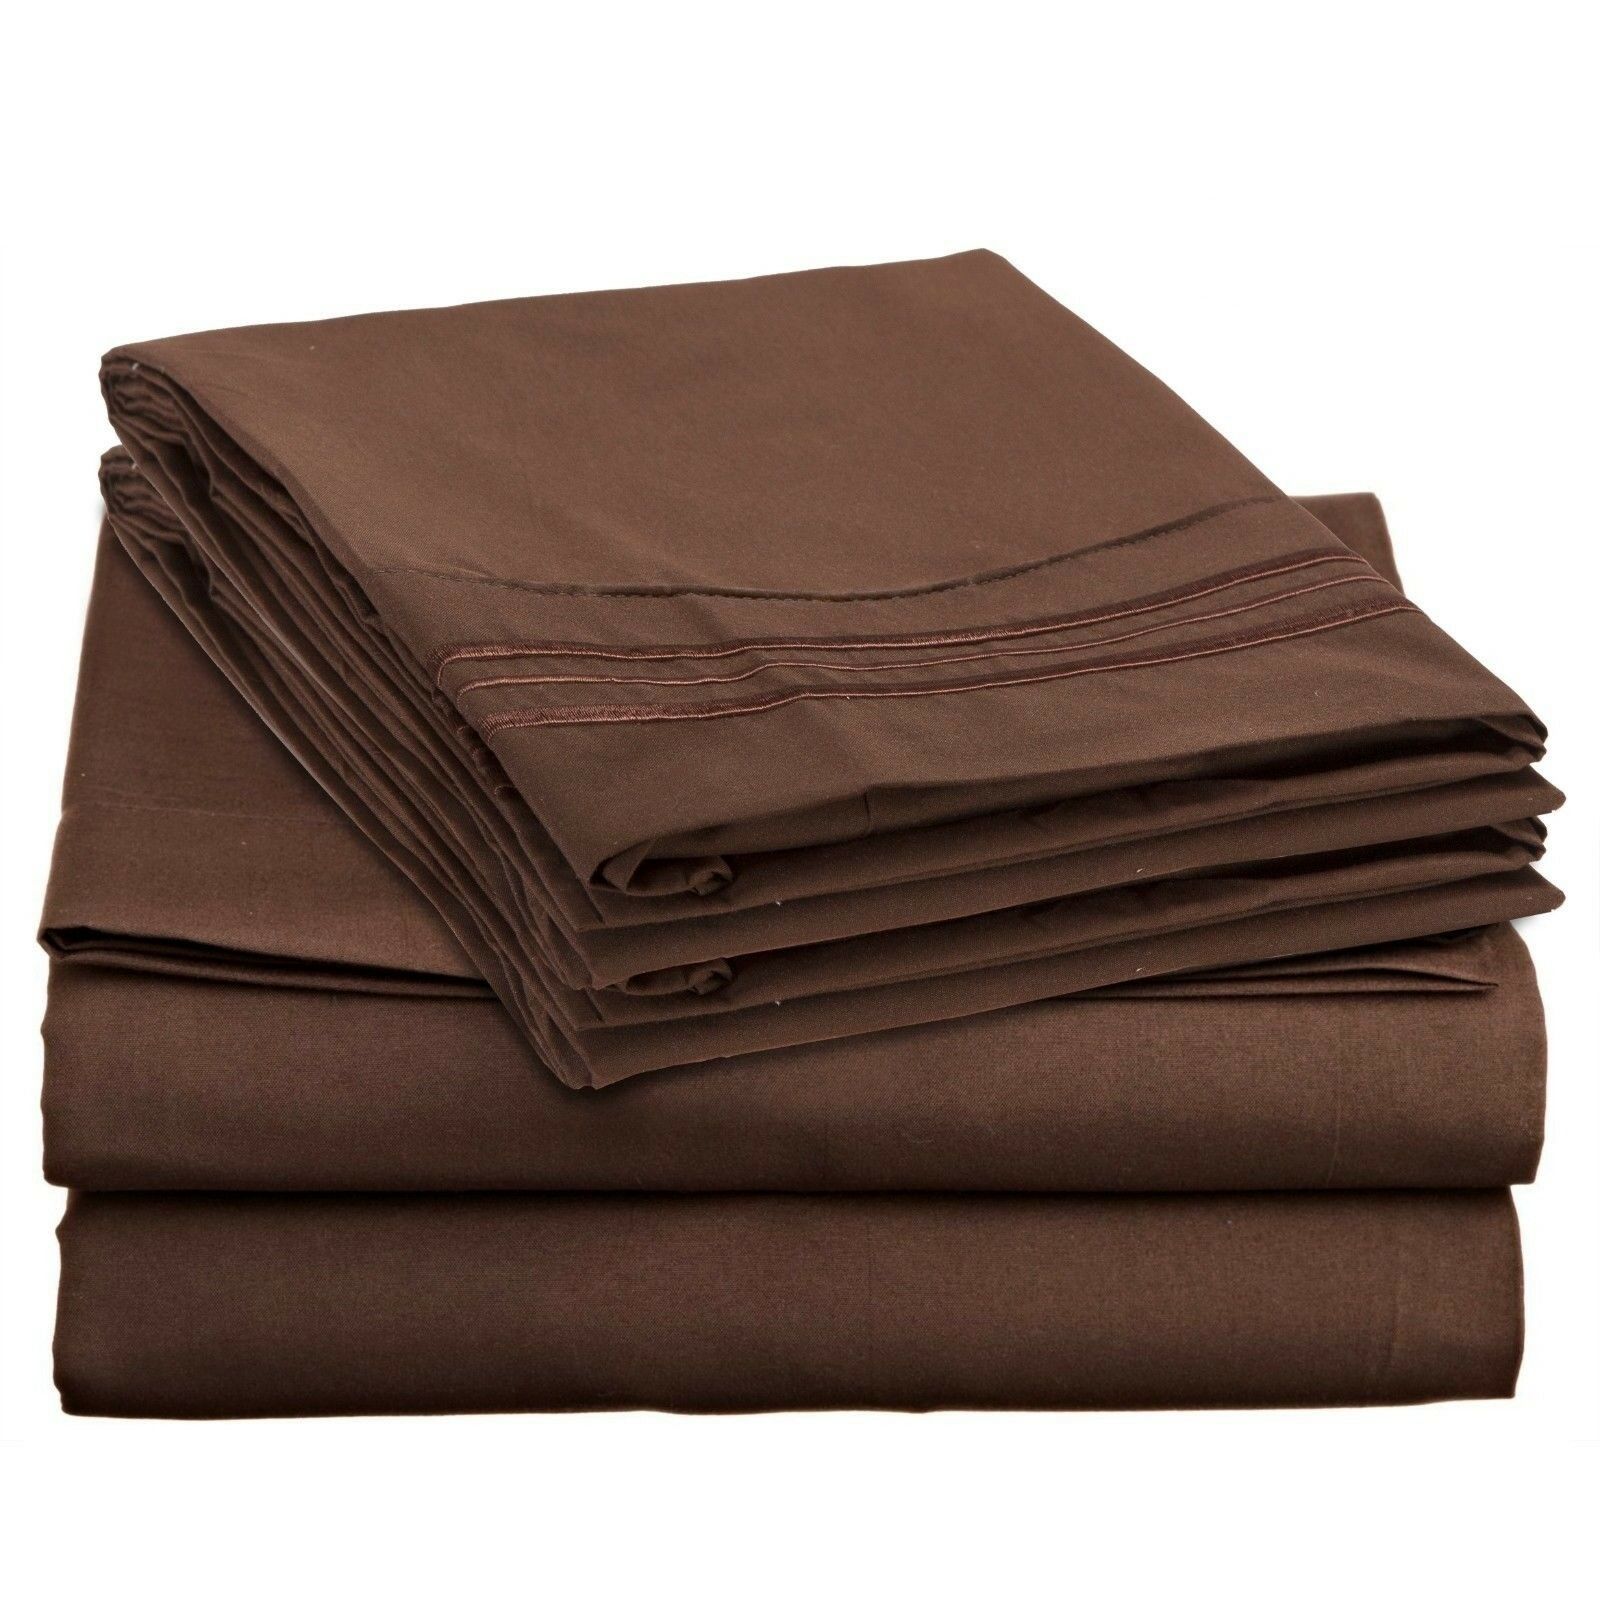 Bed Sheets - Deep Pocket Bed Sheets- 4 Piece Set, Queen, King, Twin, or Full Size - Queen / Chocolate Brown